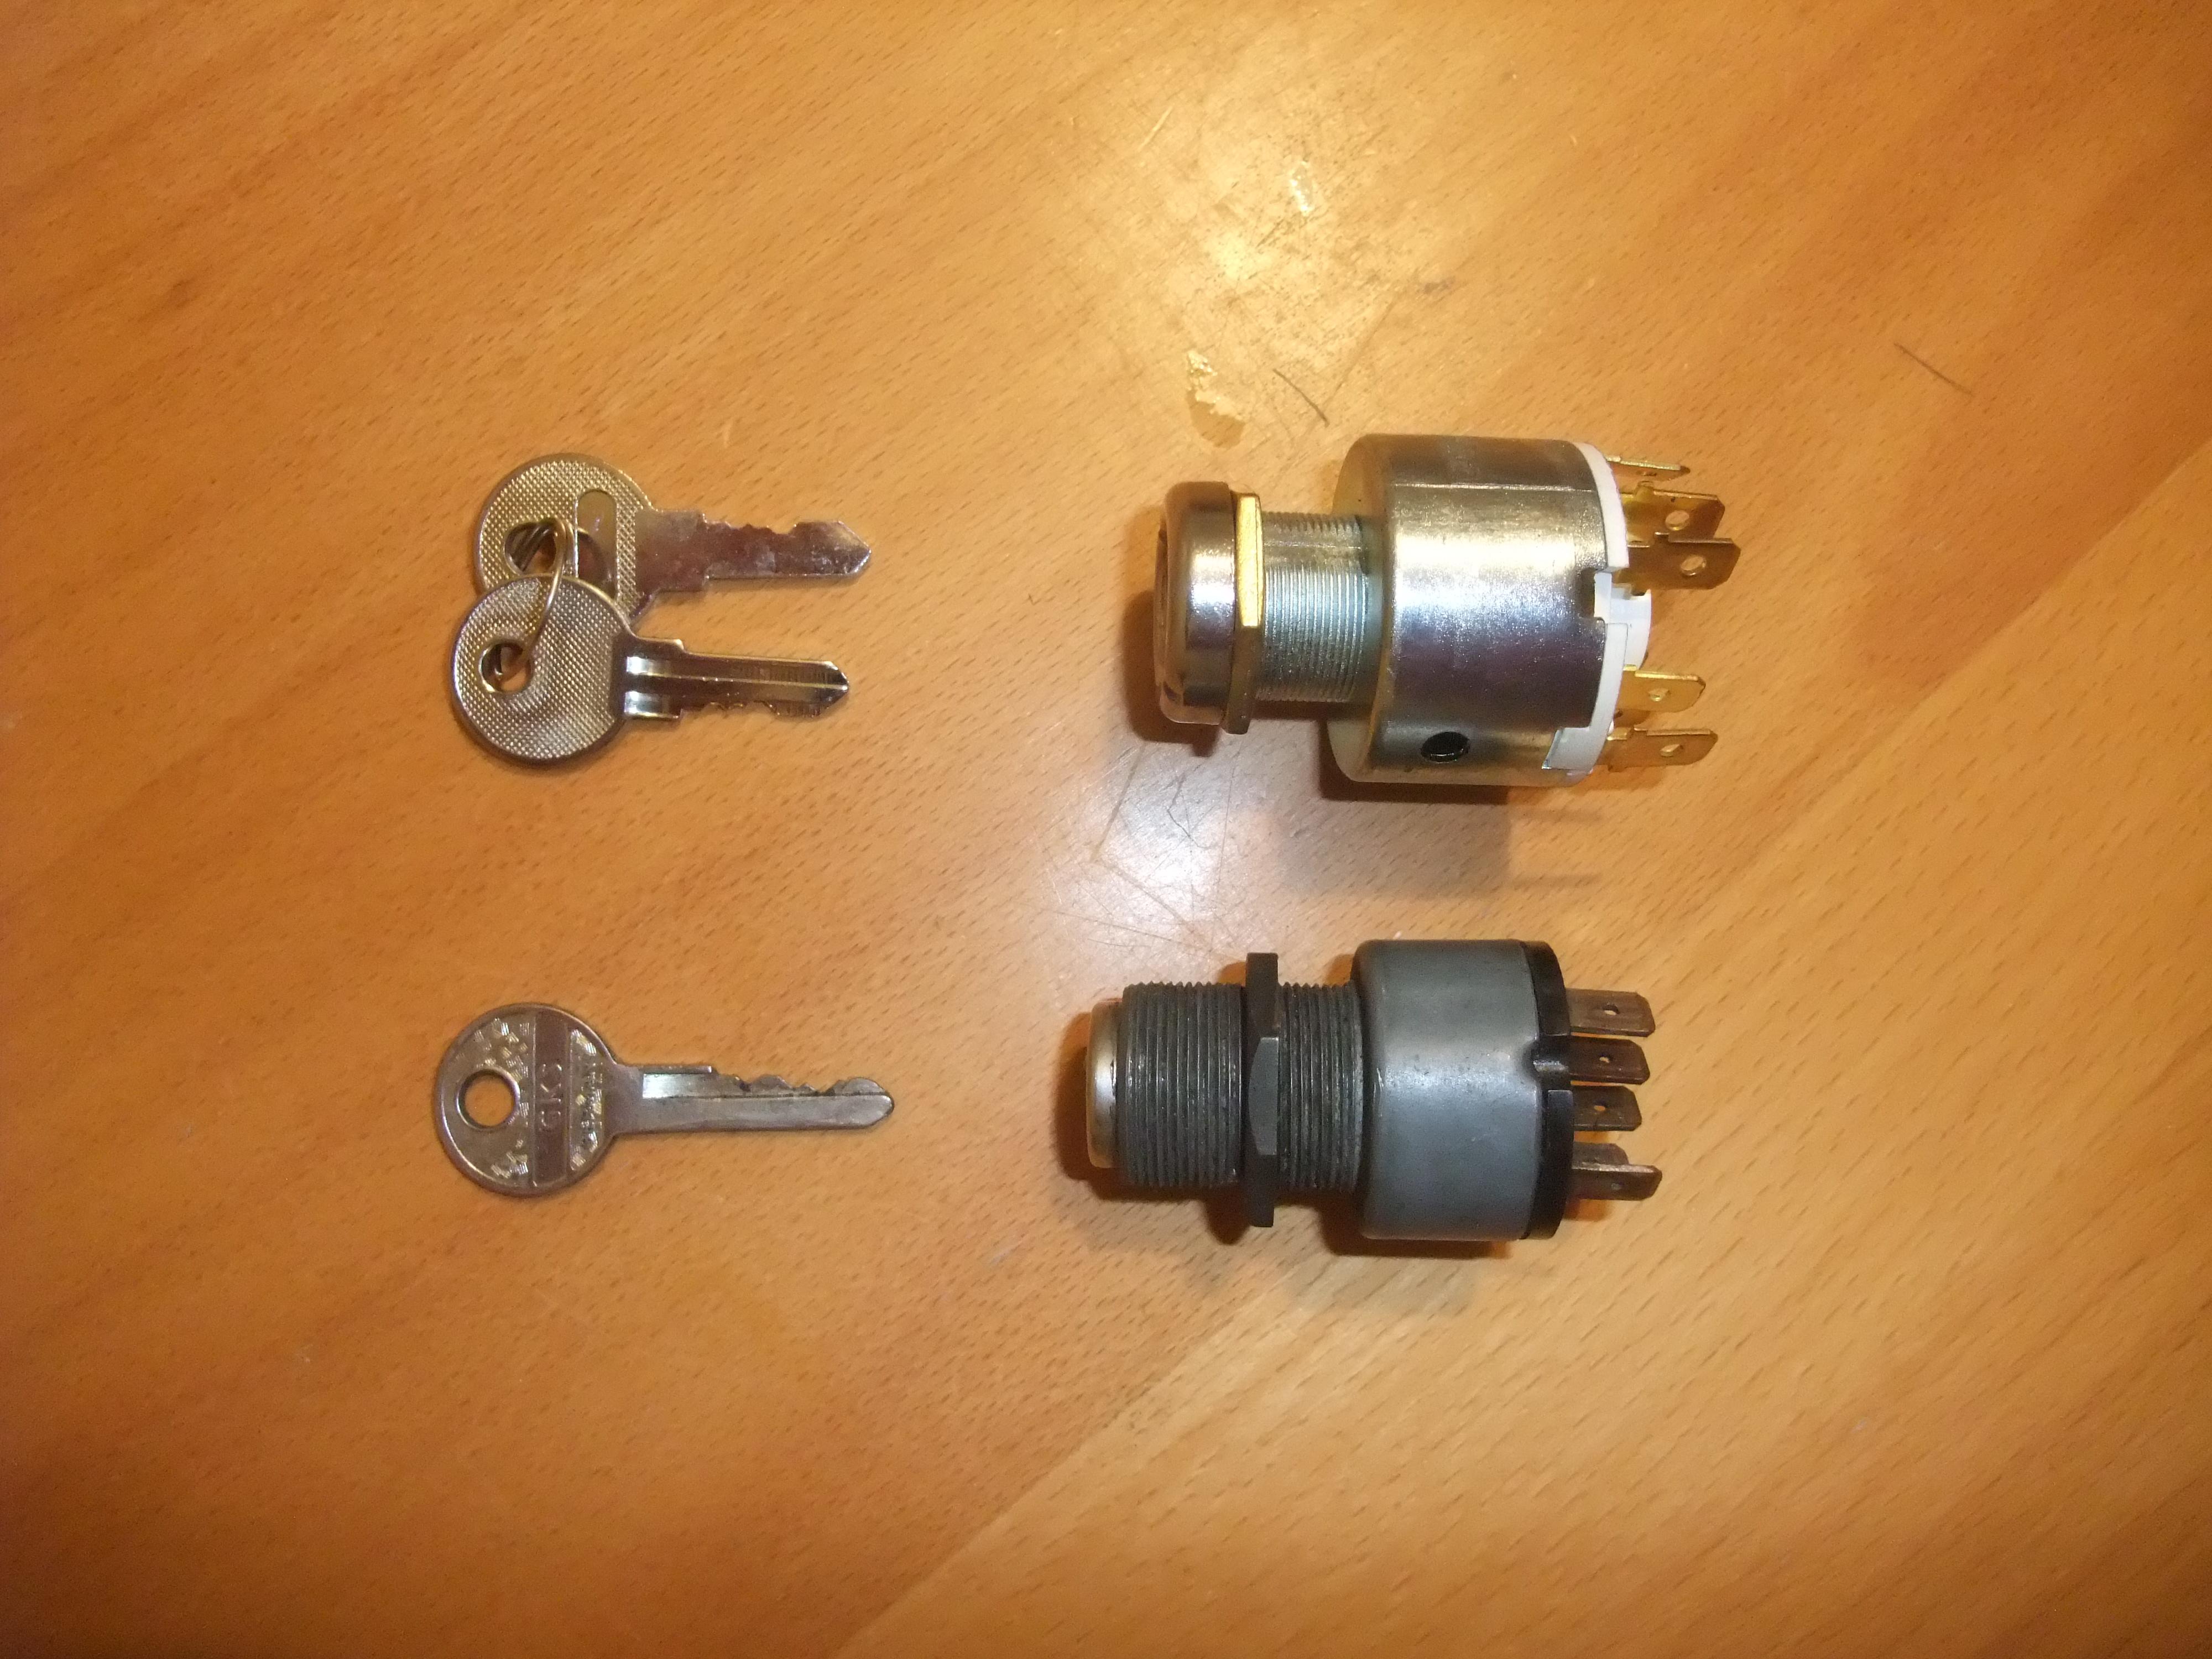 Universal fit ignition switch - 3 position - comparison with BMW Airhead Boxer ignition switch 22mm